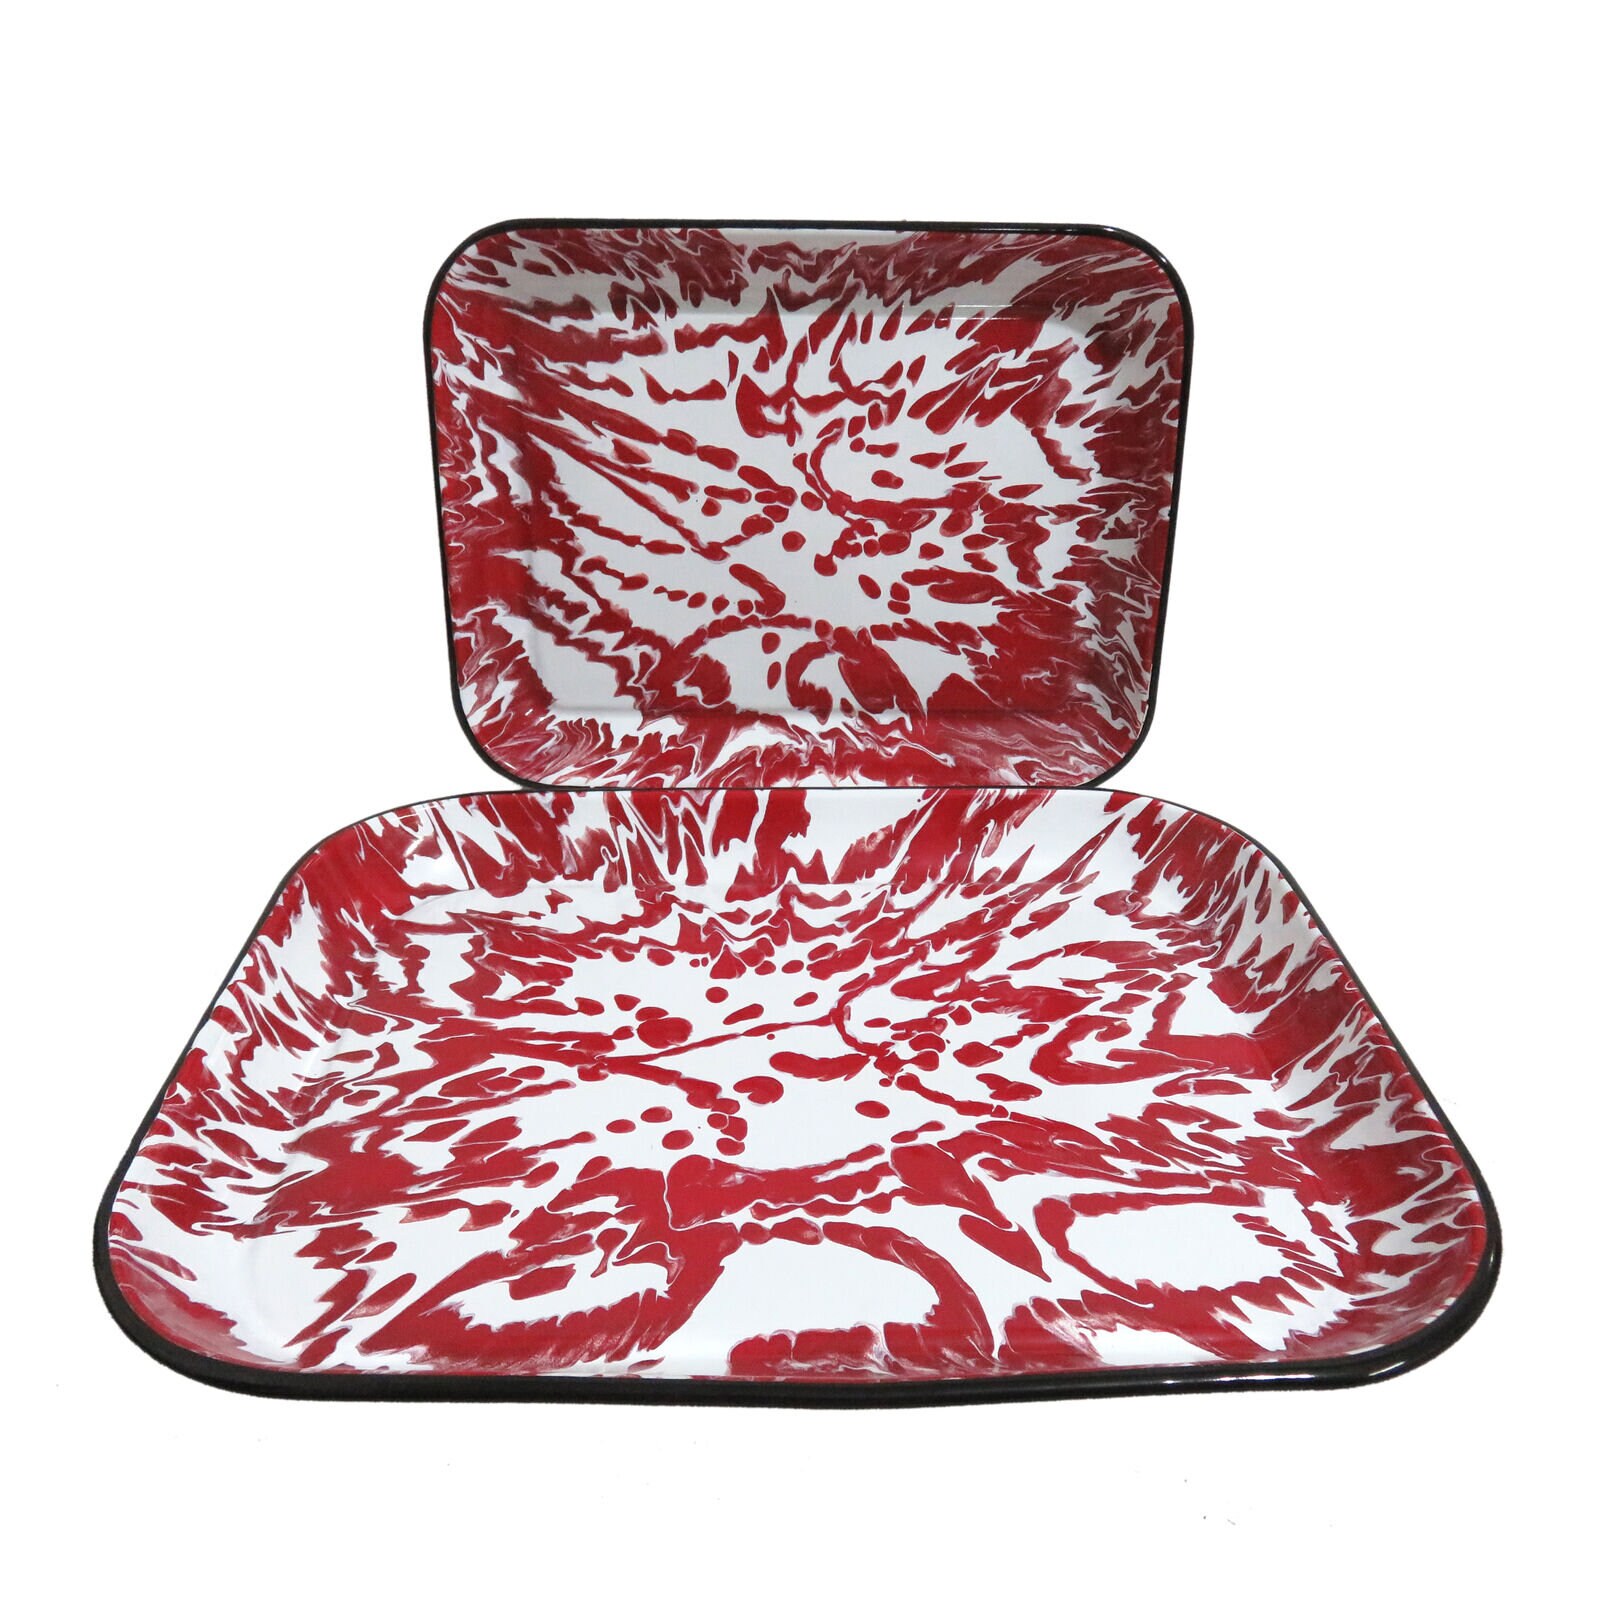 Unique Red & White Marble Effect Enamel Tray Suitable for Display & Serving 